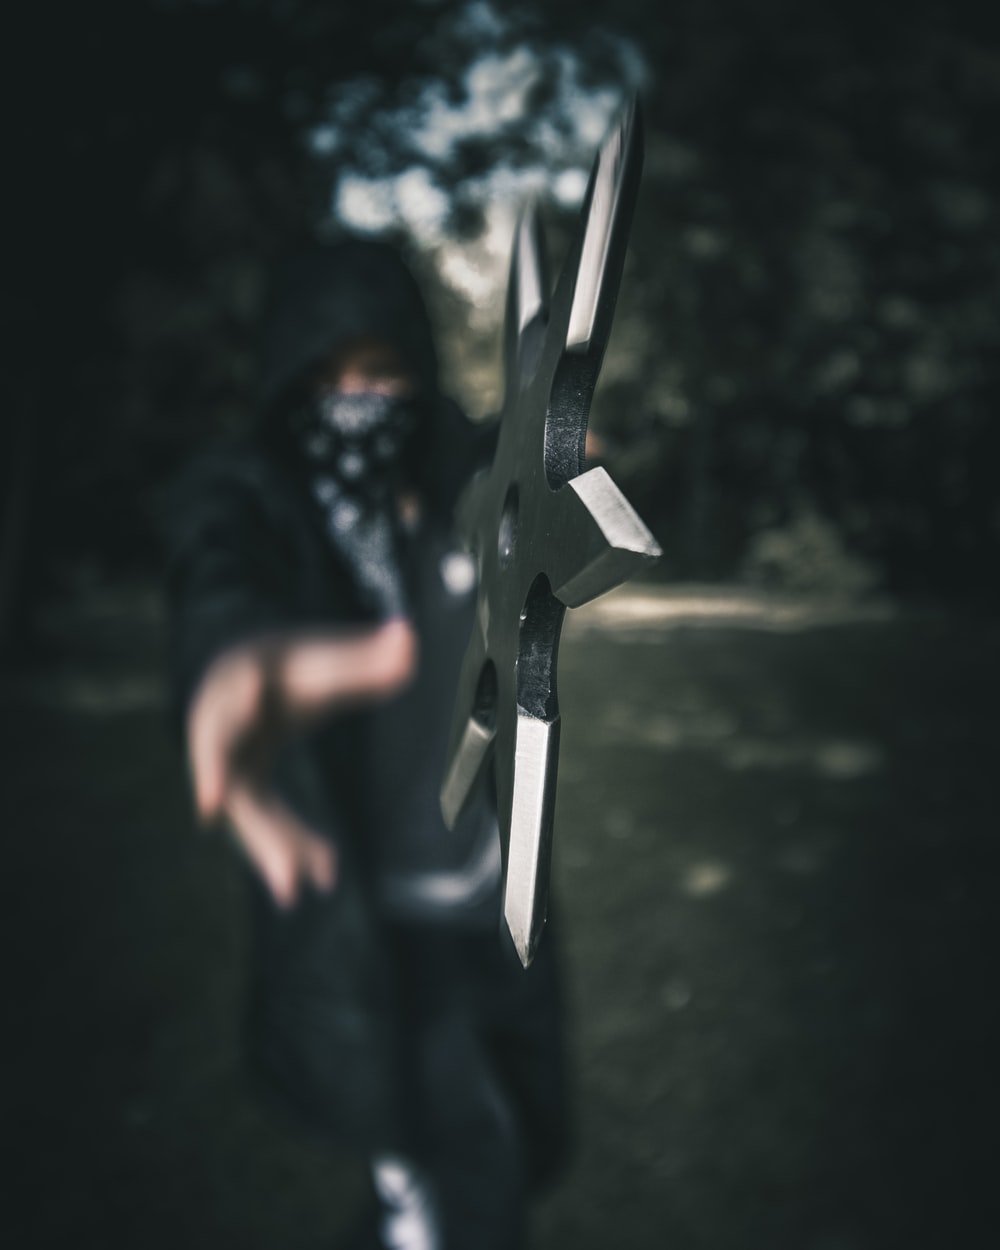 Ninjas Picture. Download Free Image